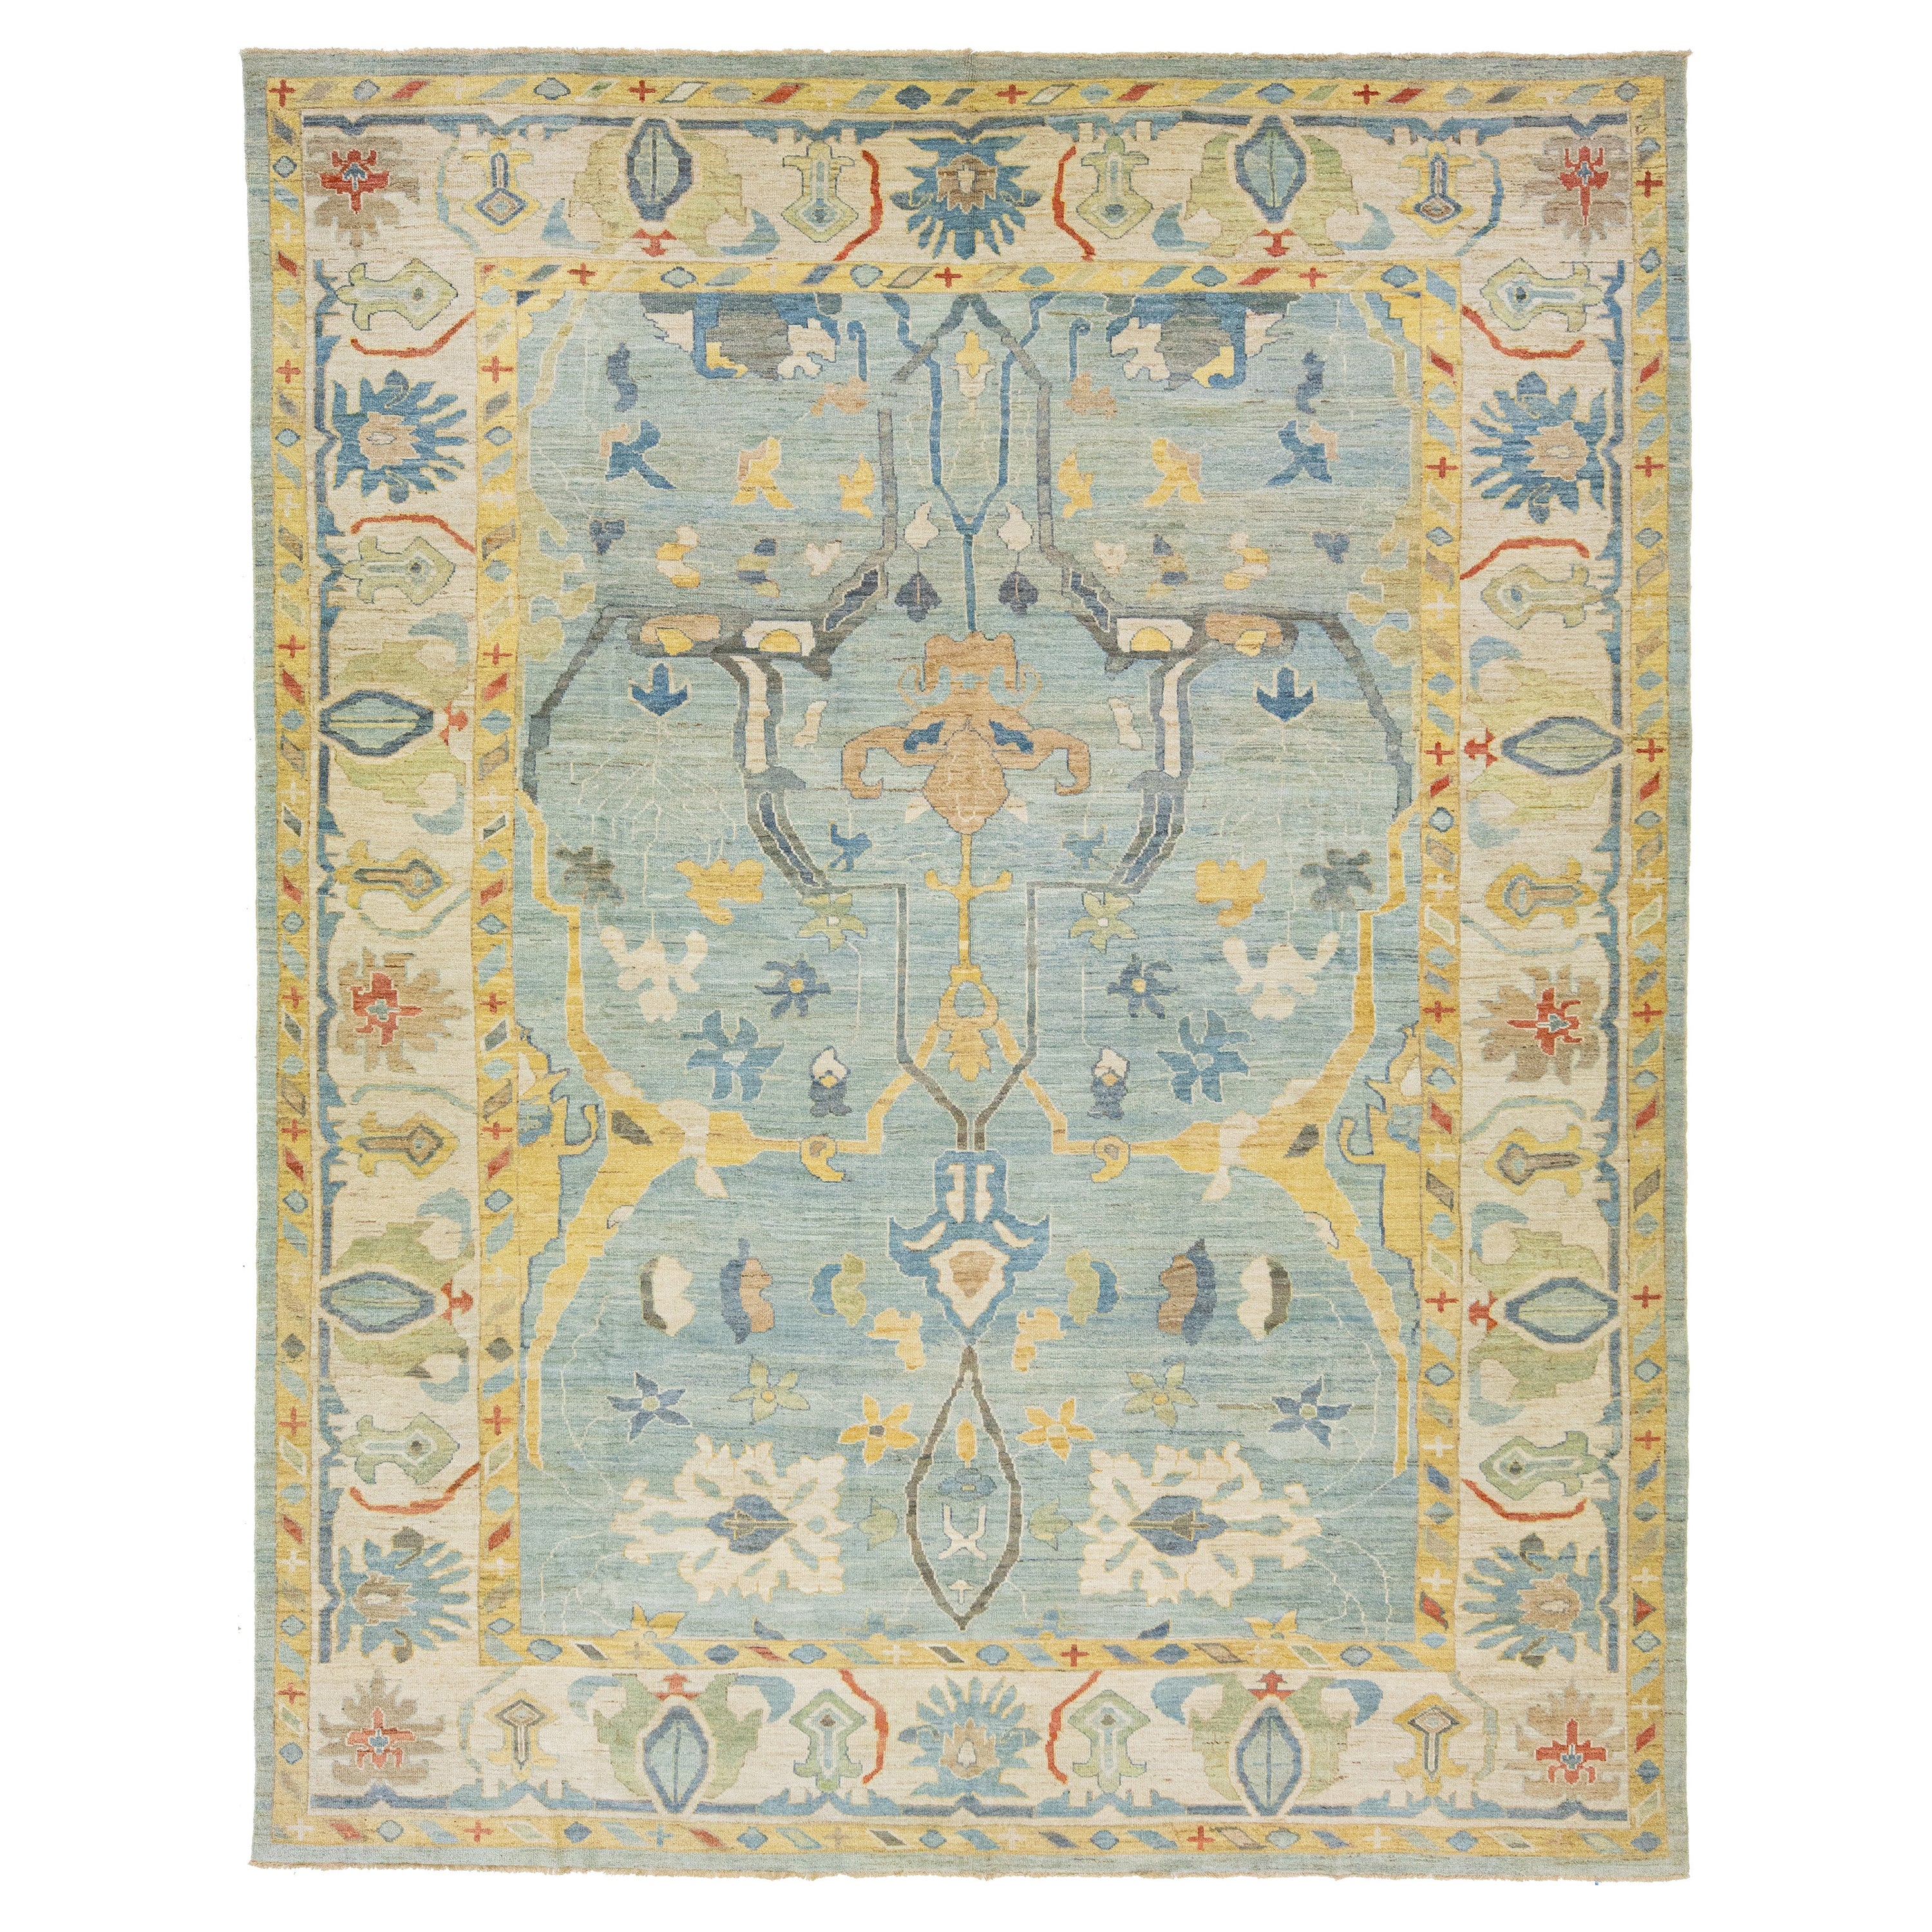  Contemporary Designed Sultanabad Oversize Wool Rug In Blue